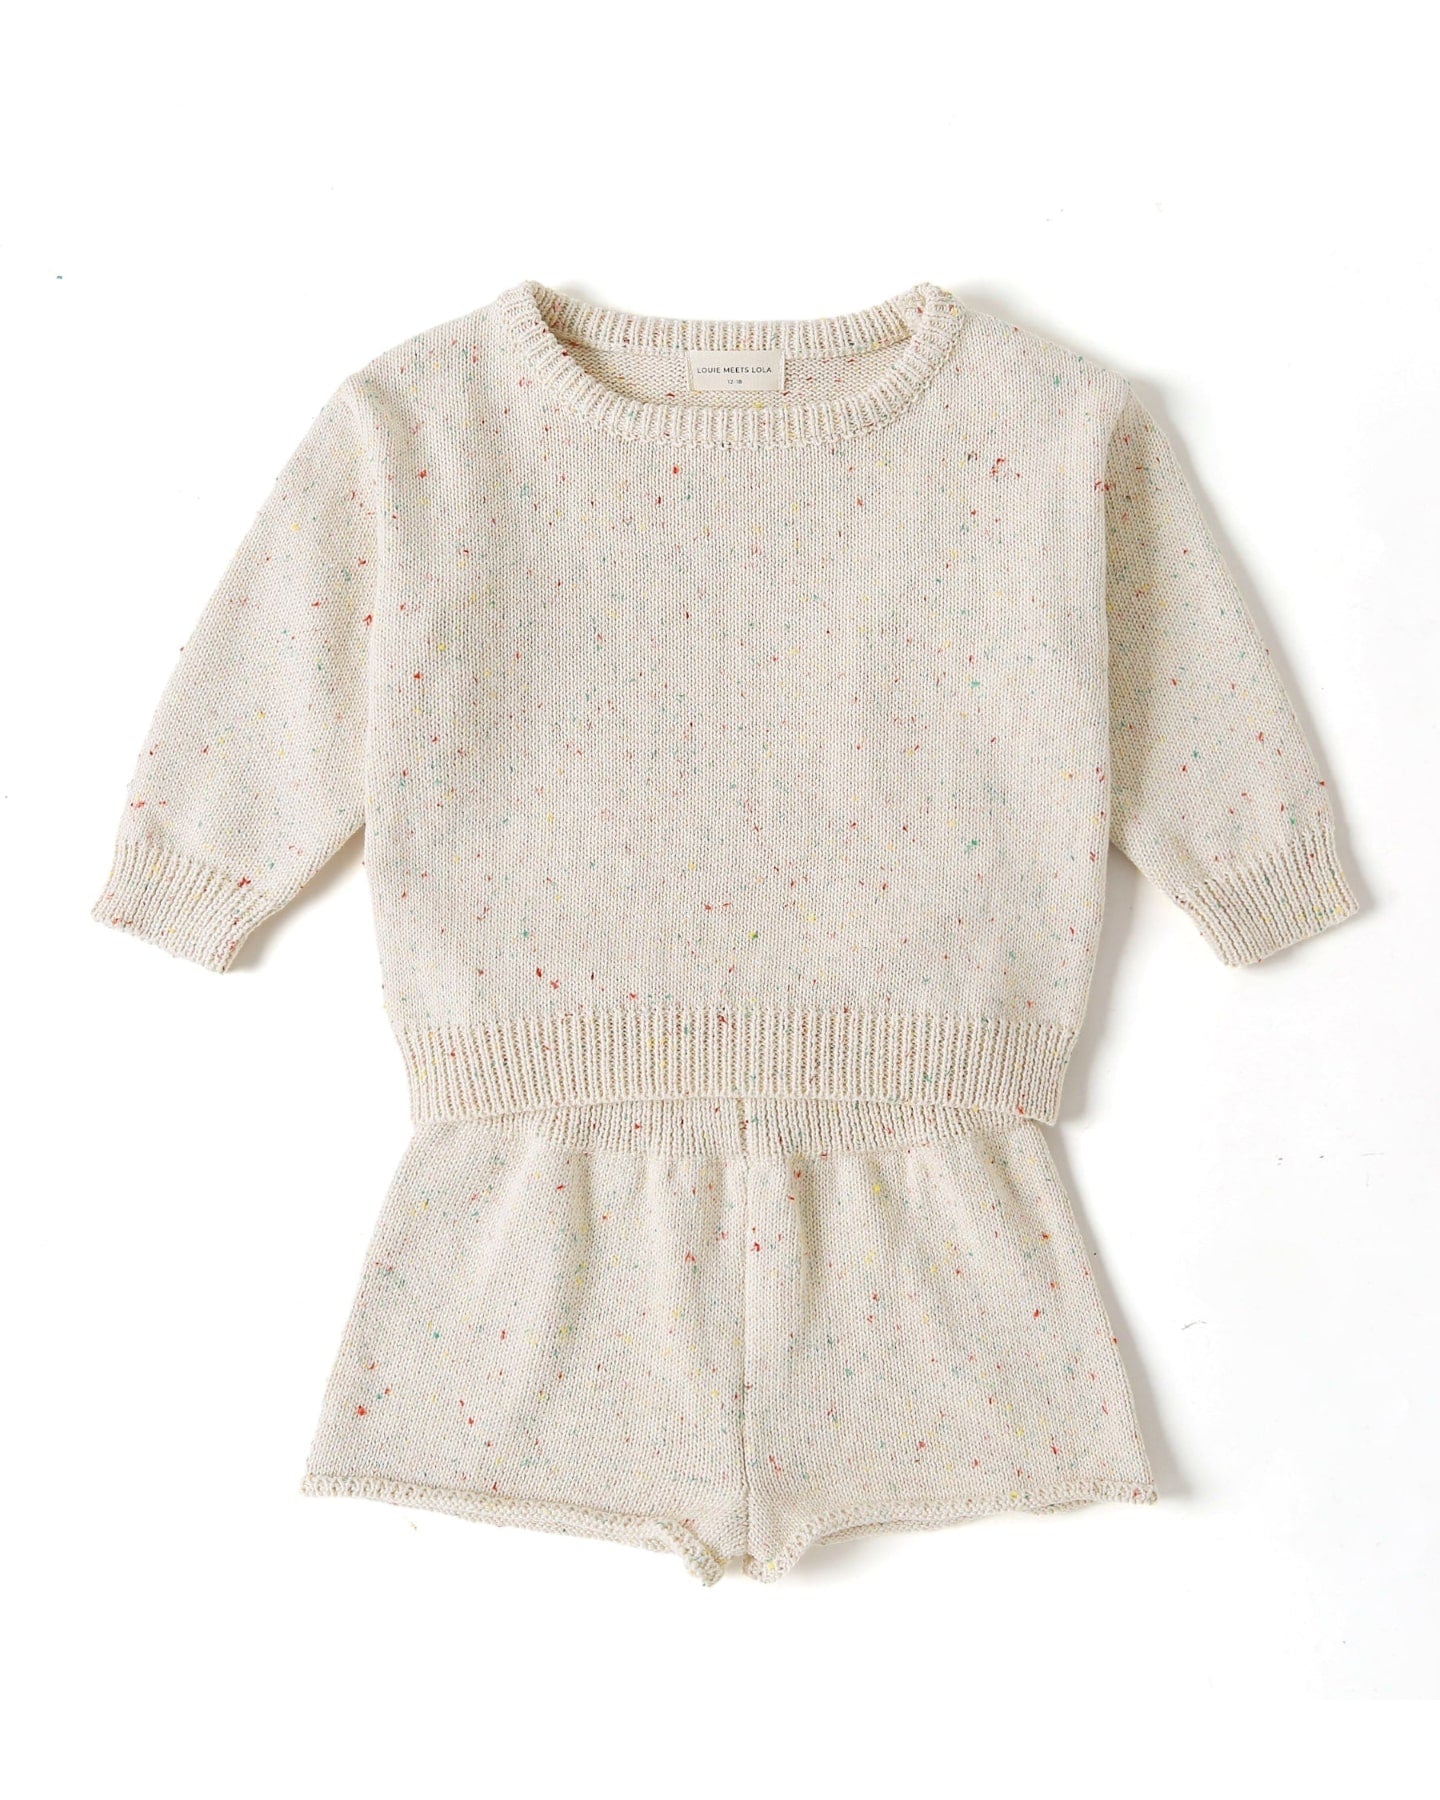 Confetti Knitted Lounge Set - Baby Outfits at Louie Meets Lola